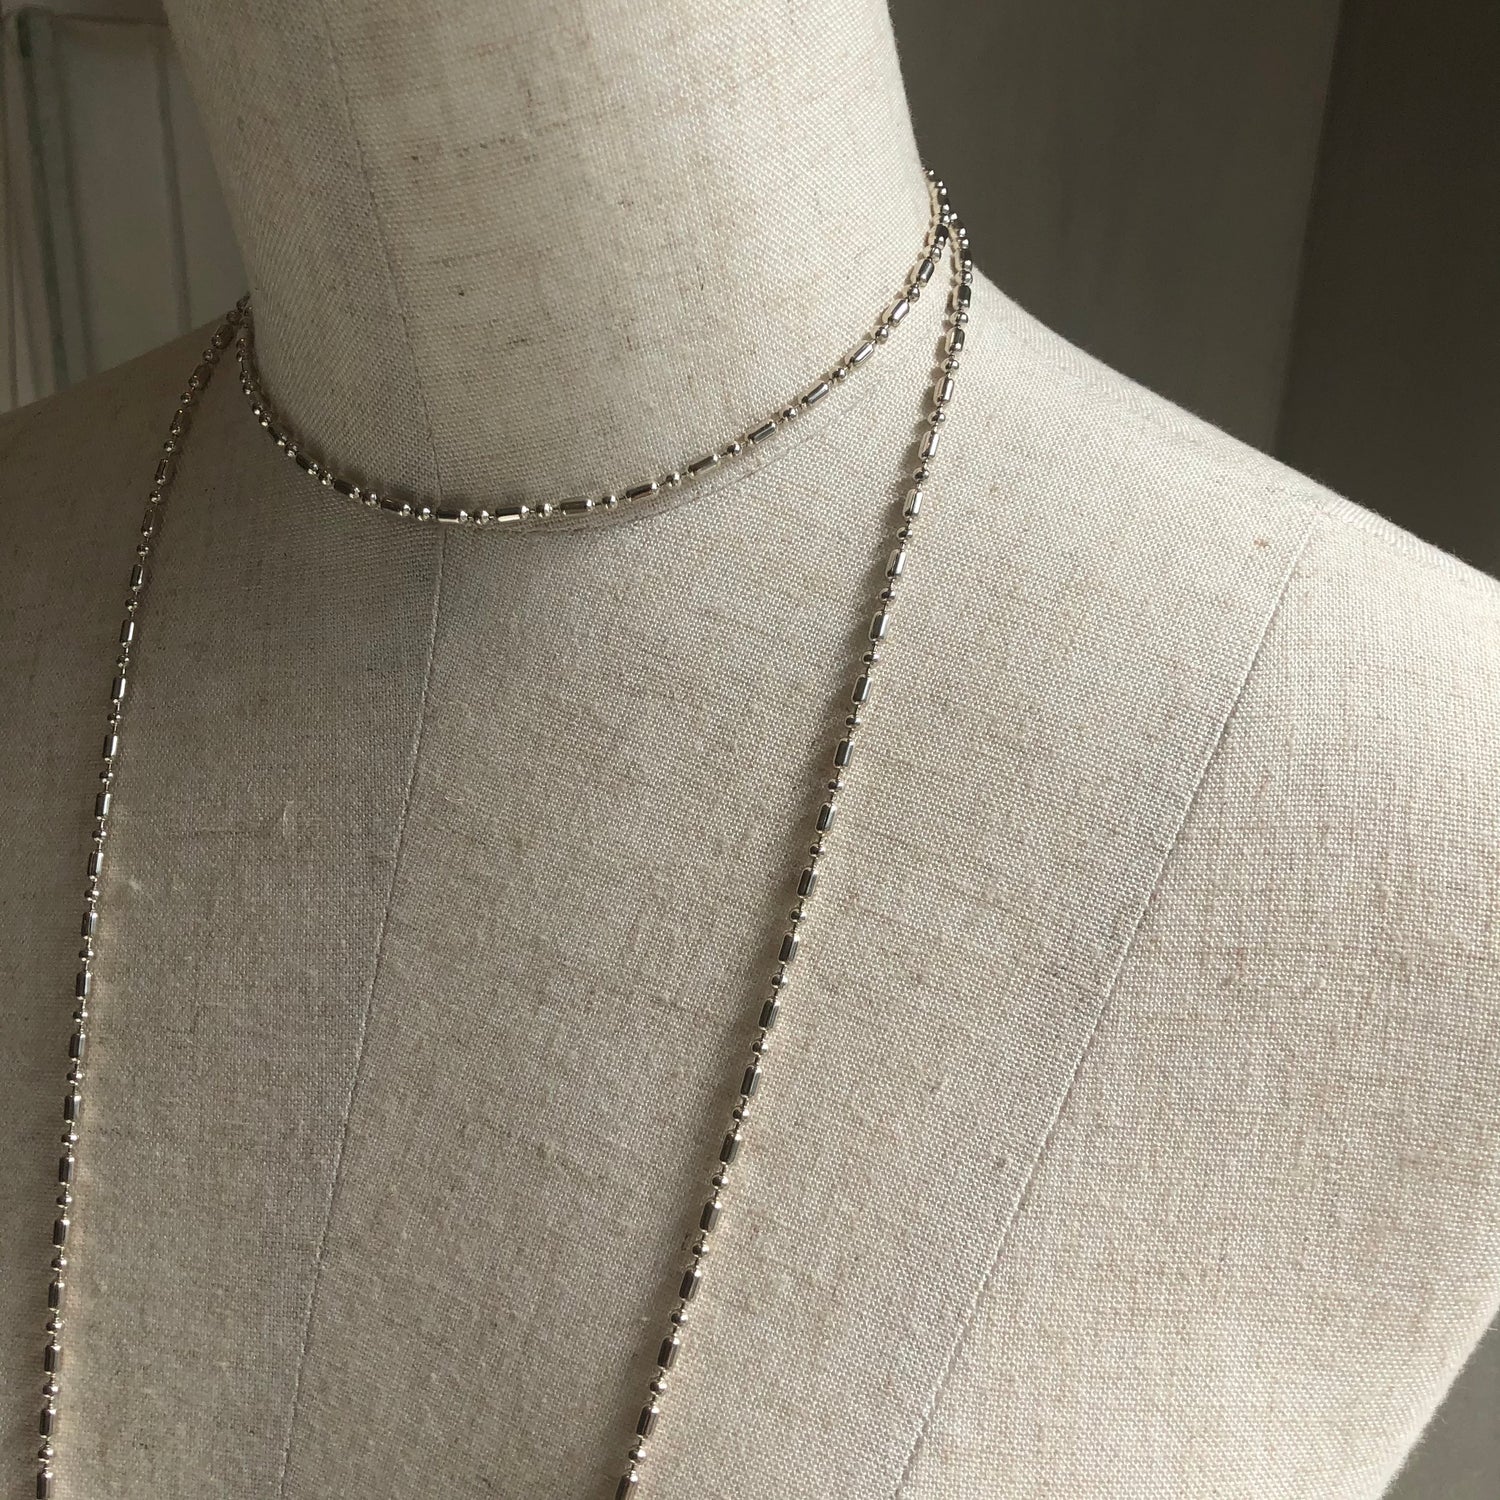 super long chain necklace / silver